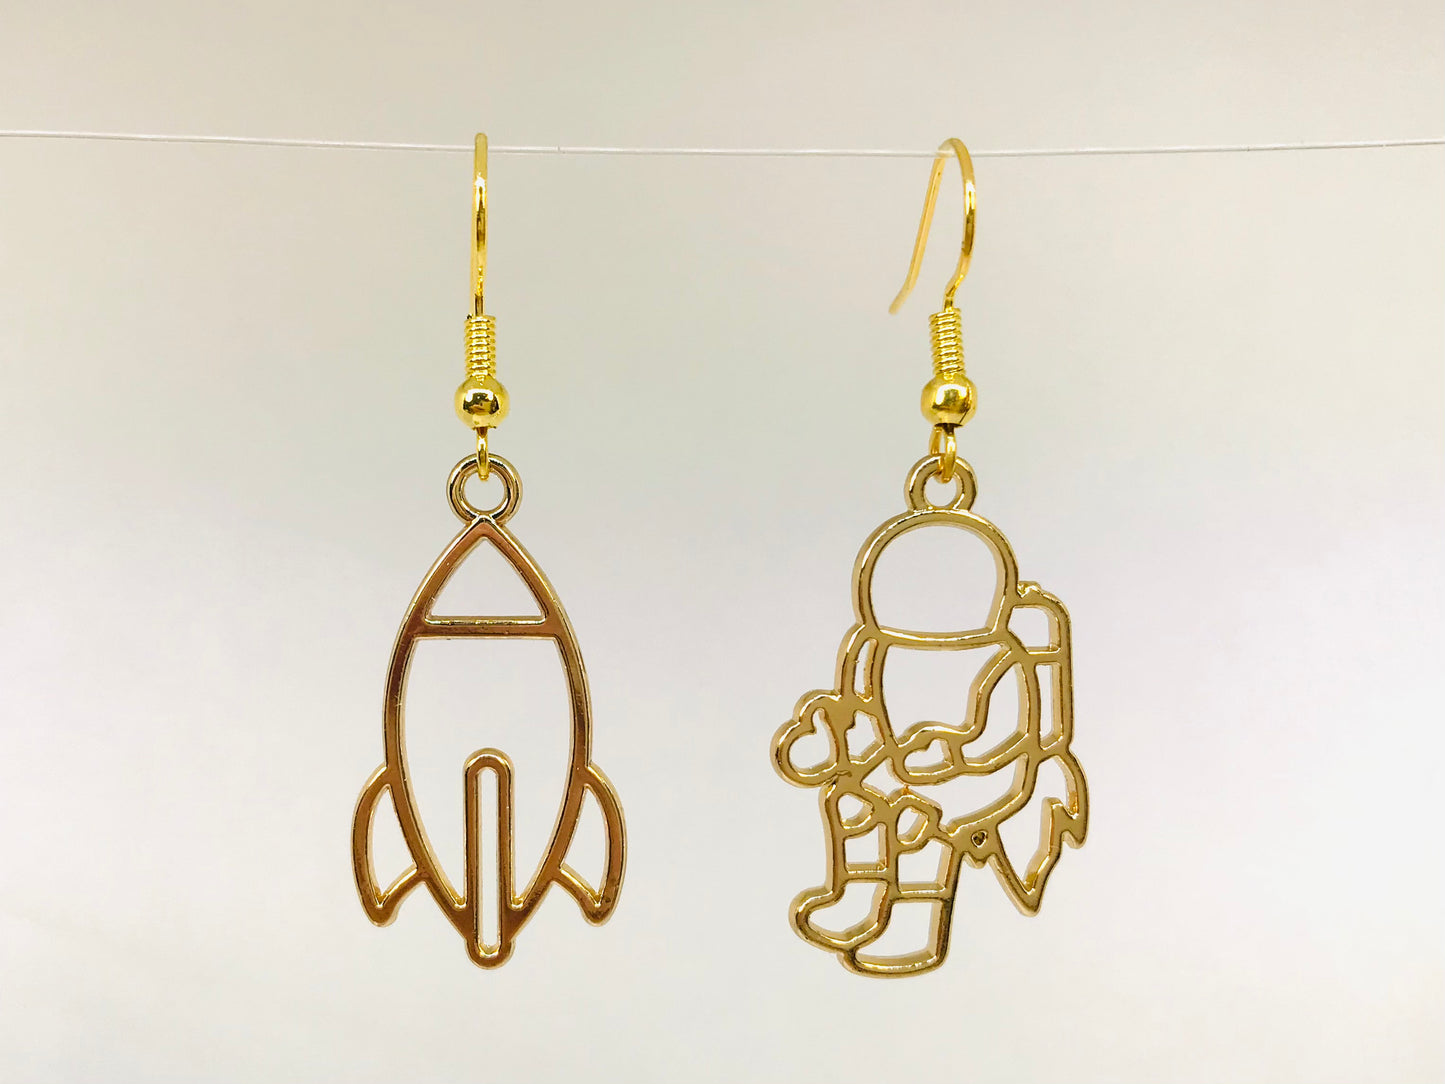 Planet and Space shuttle Earrings